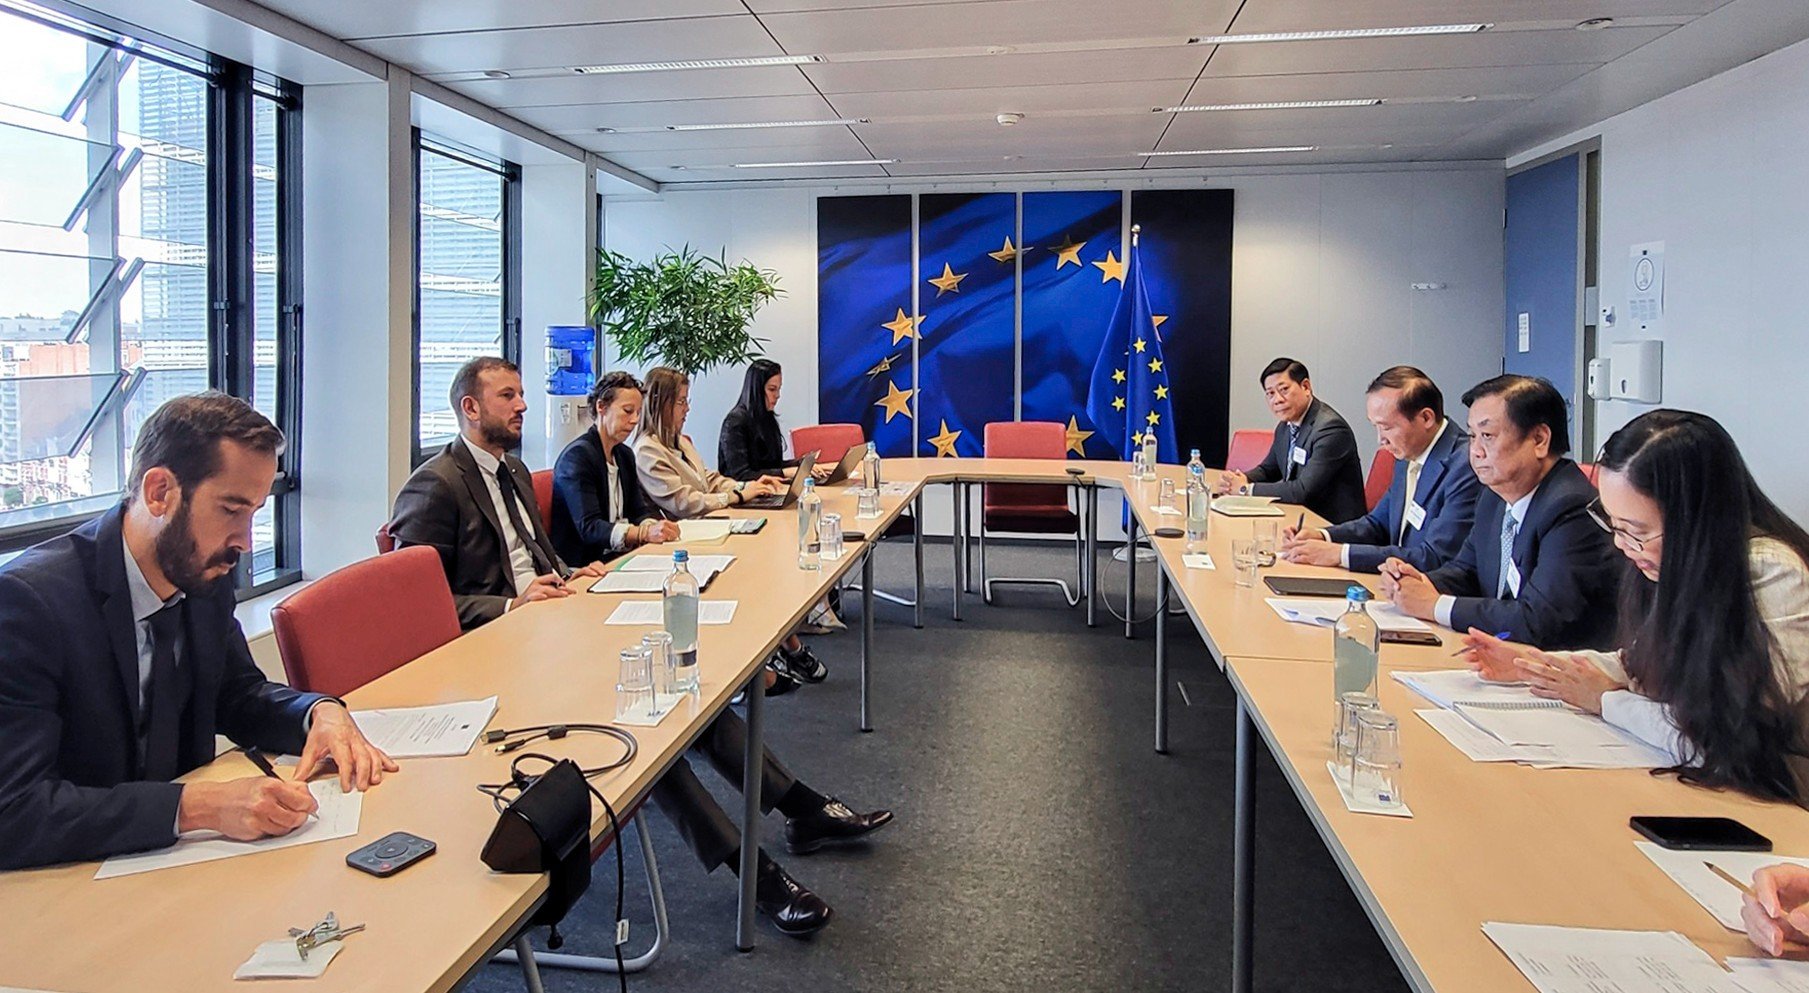 Minister Le Minh Hoan led the delegation of the Ministry of Agriculture and Rural Development to visit and work with agencies of the European Commission in Brussels, Belgium on September 18. Photo: Anh Tuan.